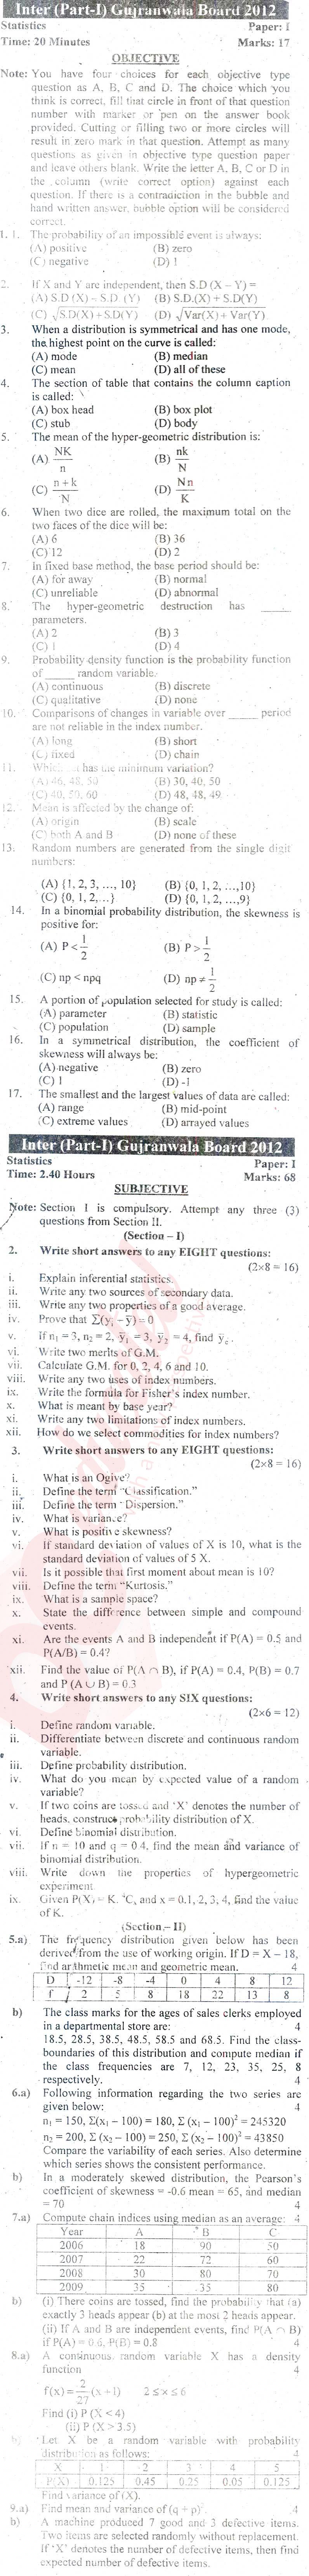 Statistics 11th class Past Paper Group 1 BISE Gujranwala 2012